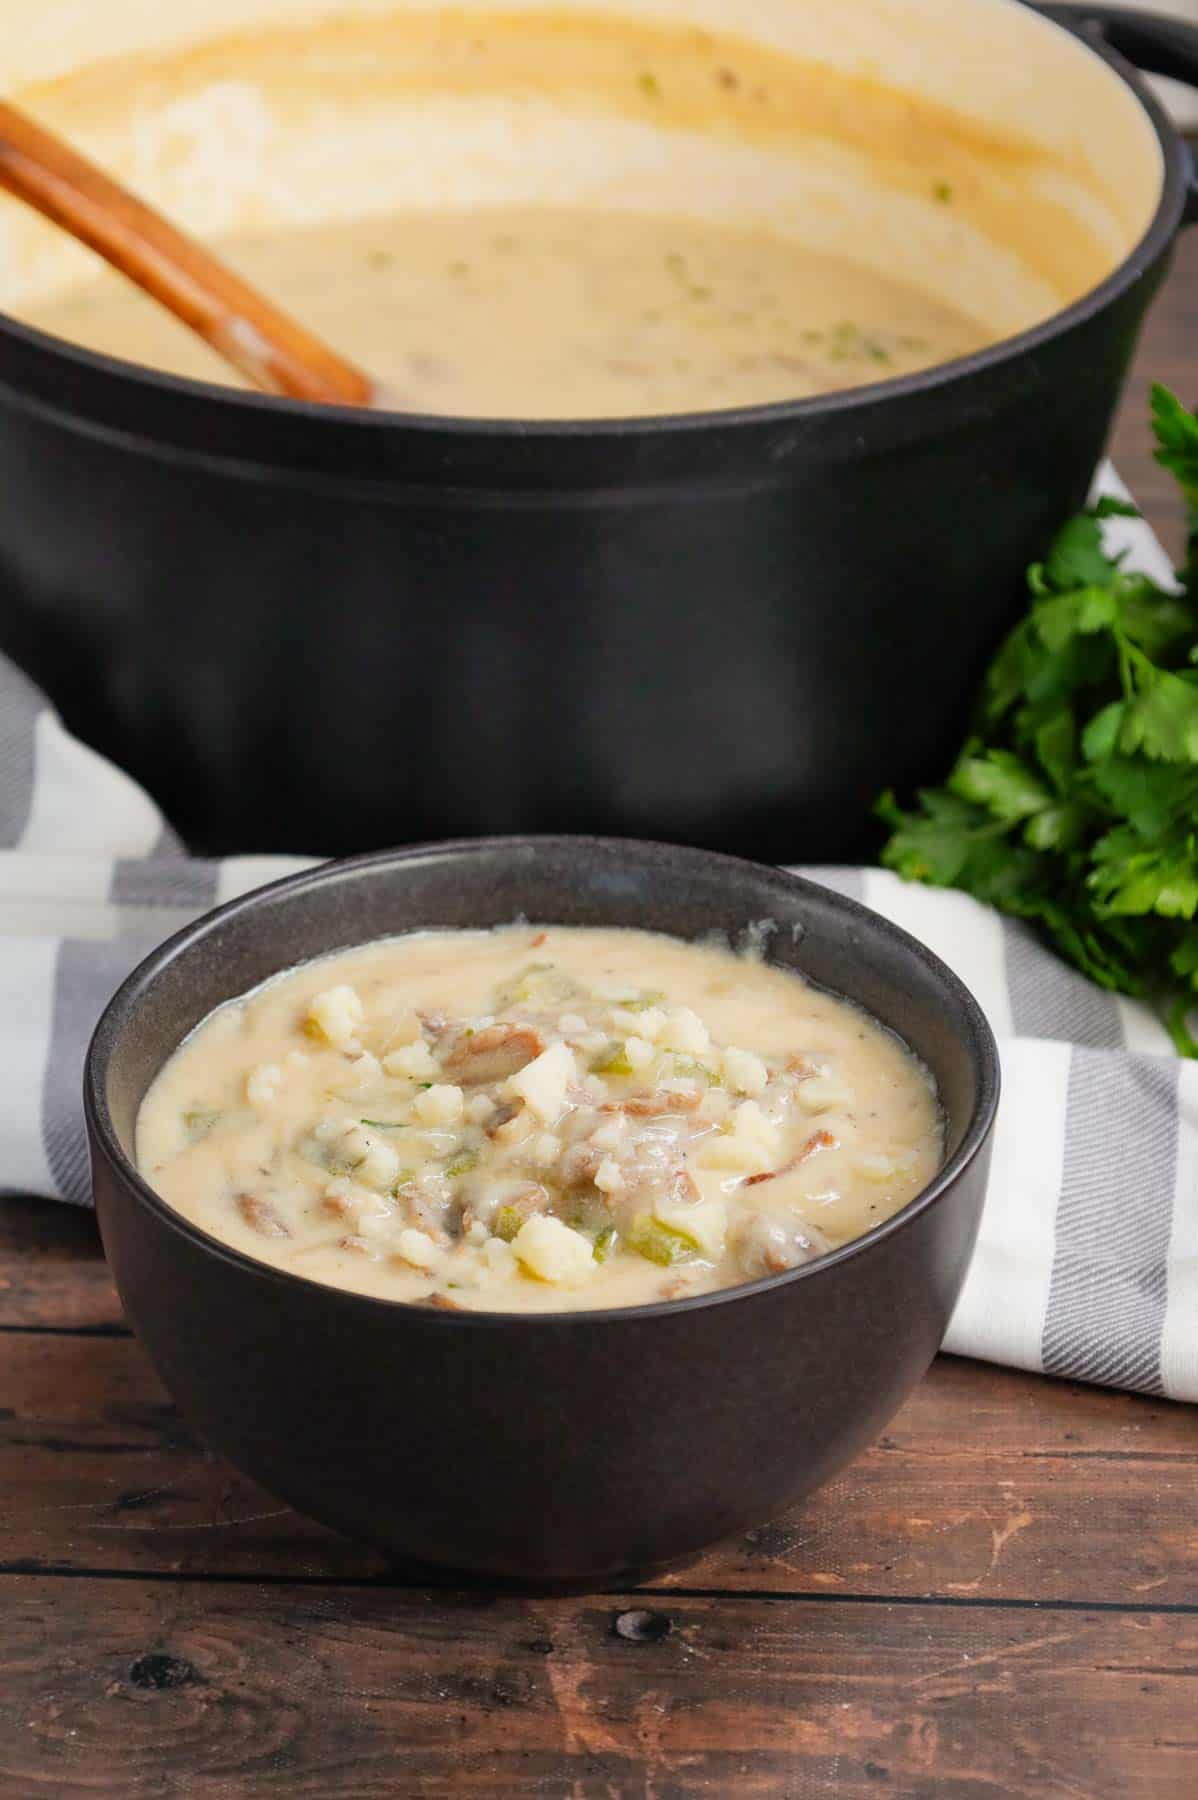 Philly Cheese Steak Soup is a hearty soup loaded with chopped deli roast beef, diced onions, green bell peppers, sliced mushrooms and provolone cheese.